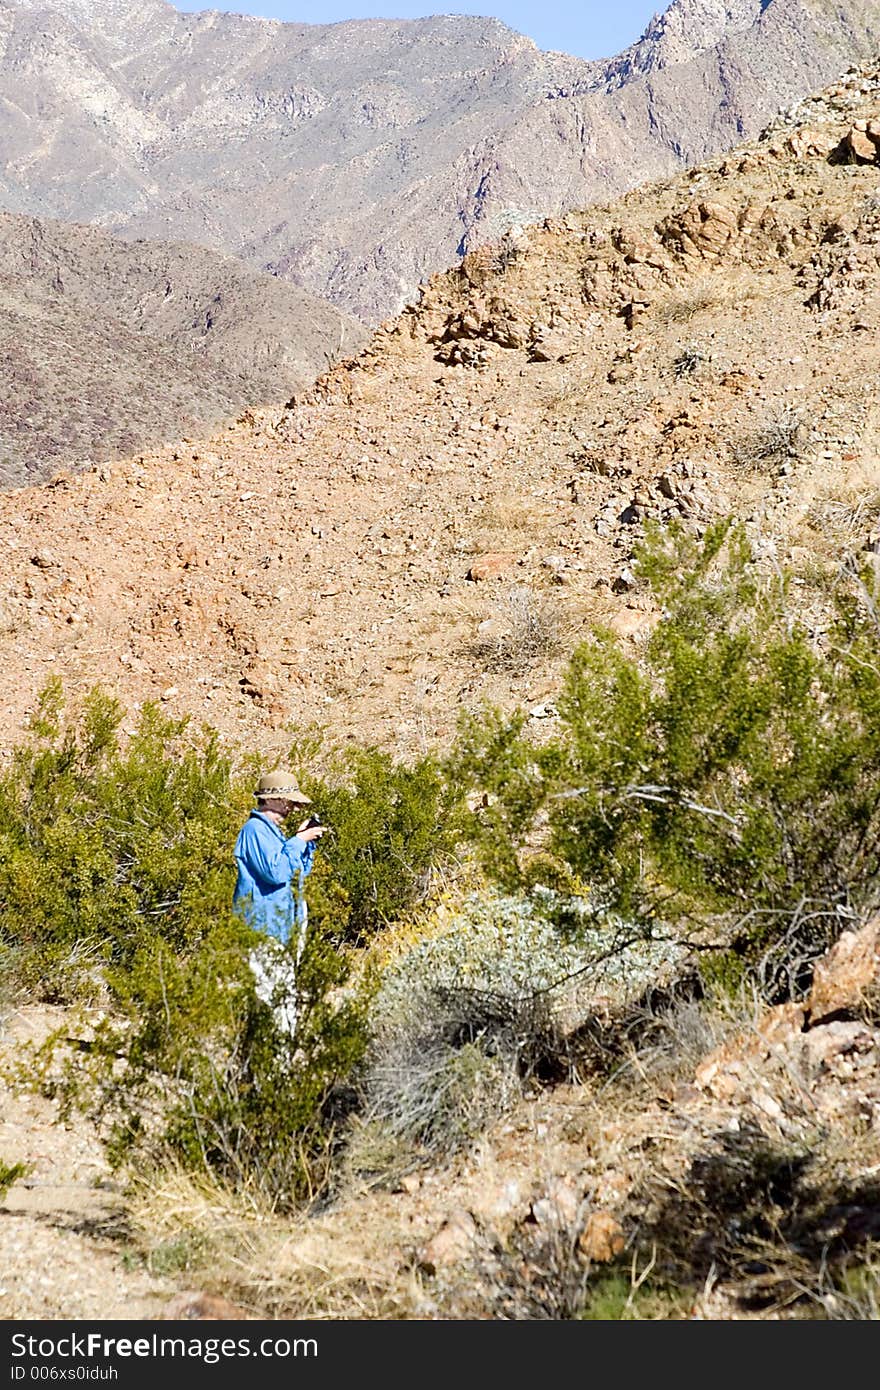 Mature women hiker taking pictures of desert flowers during a long hike in the desert.